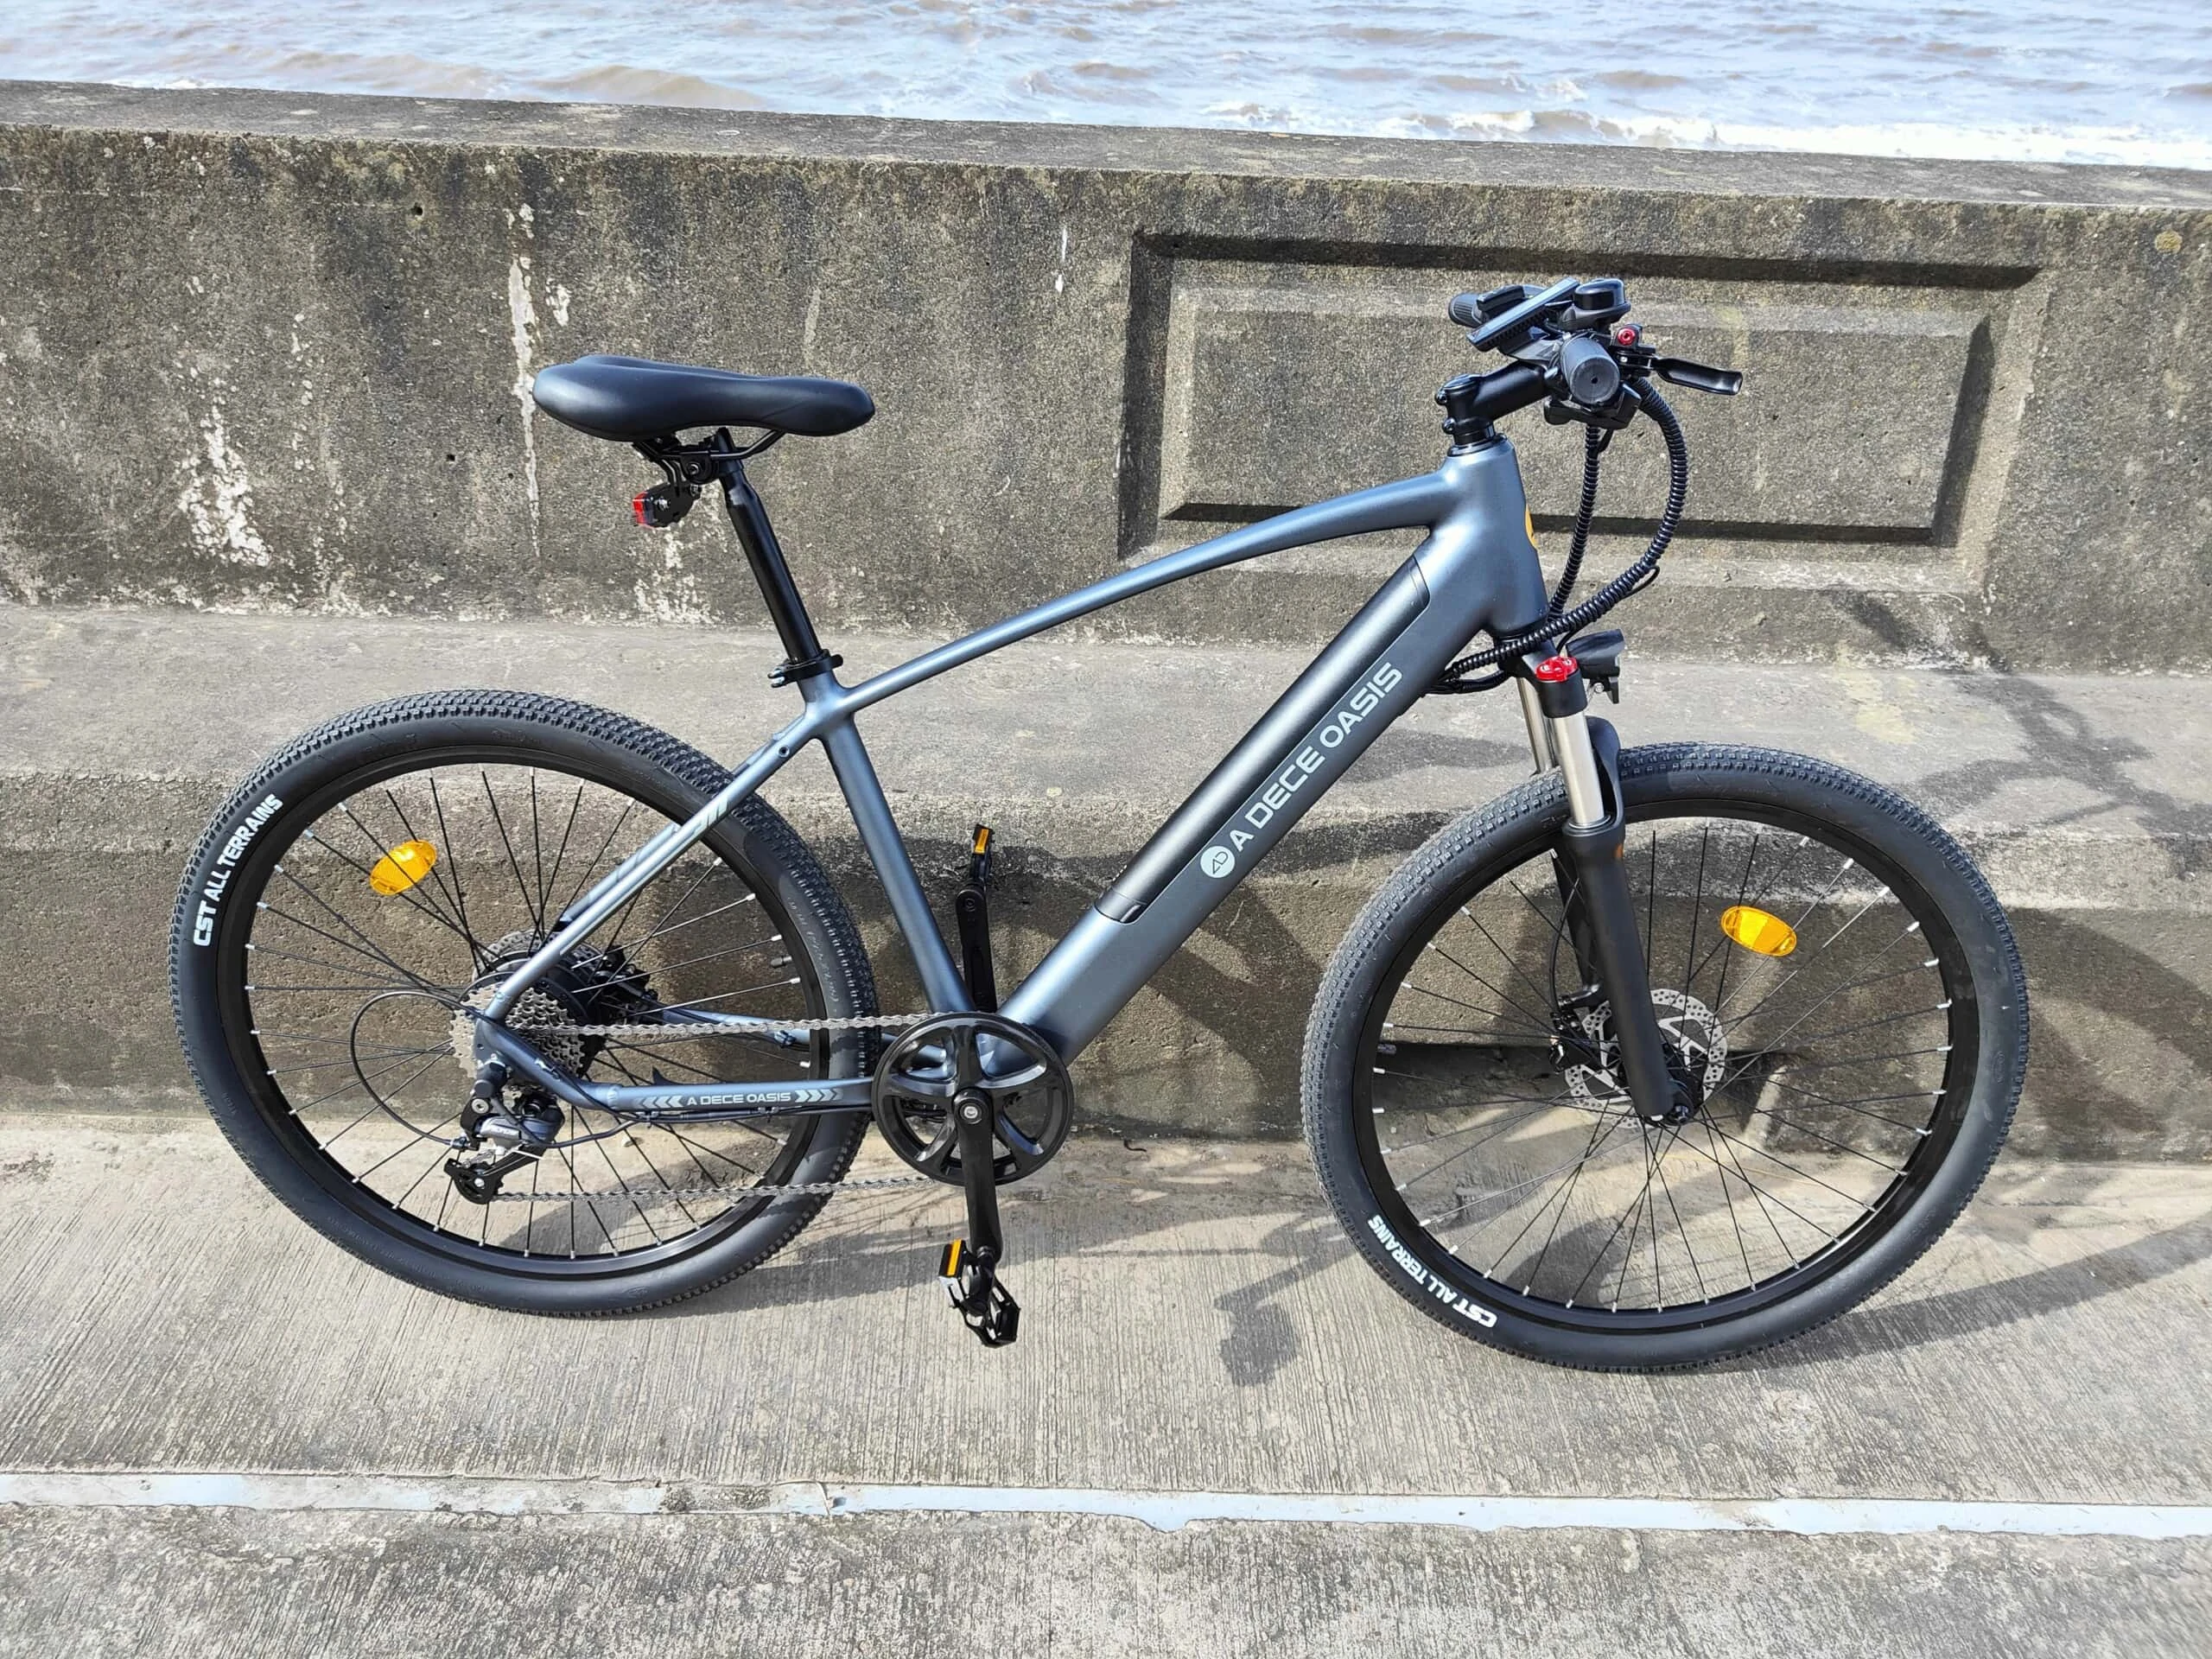 Do Electric Bikes Still Provide a Good Workout?